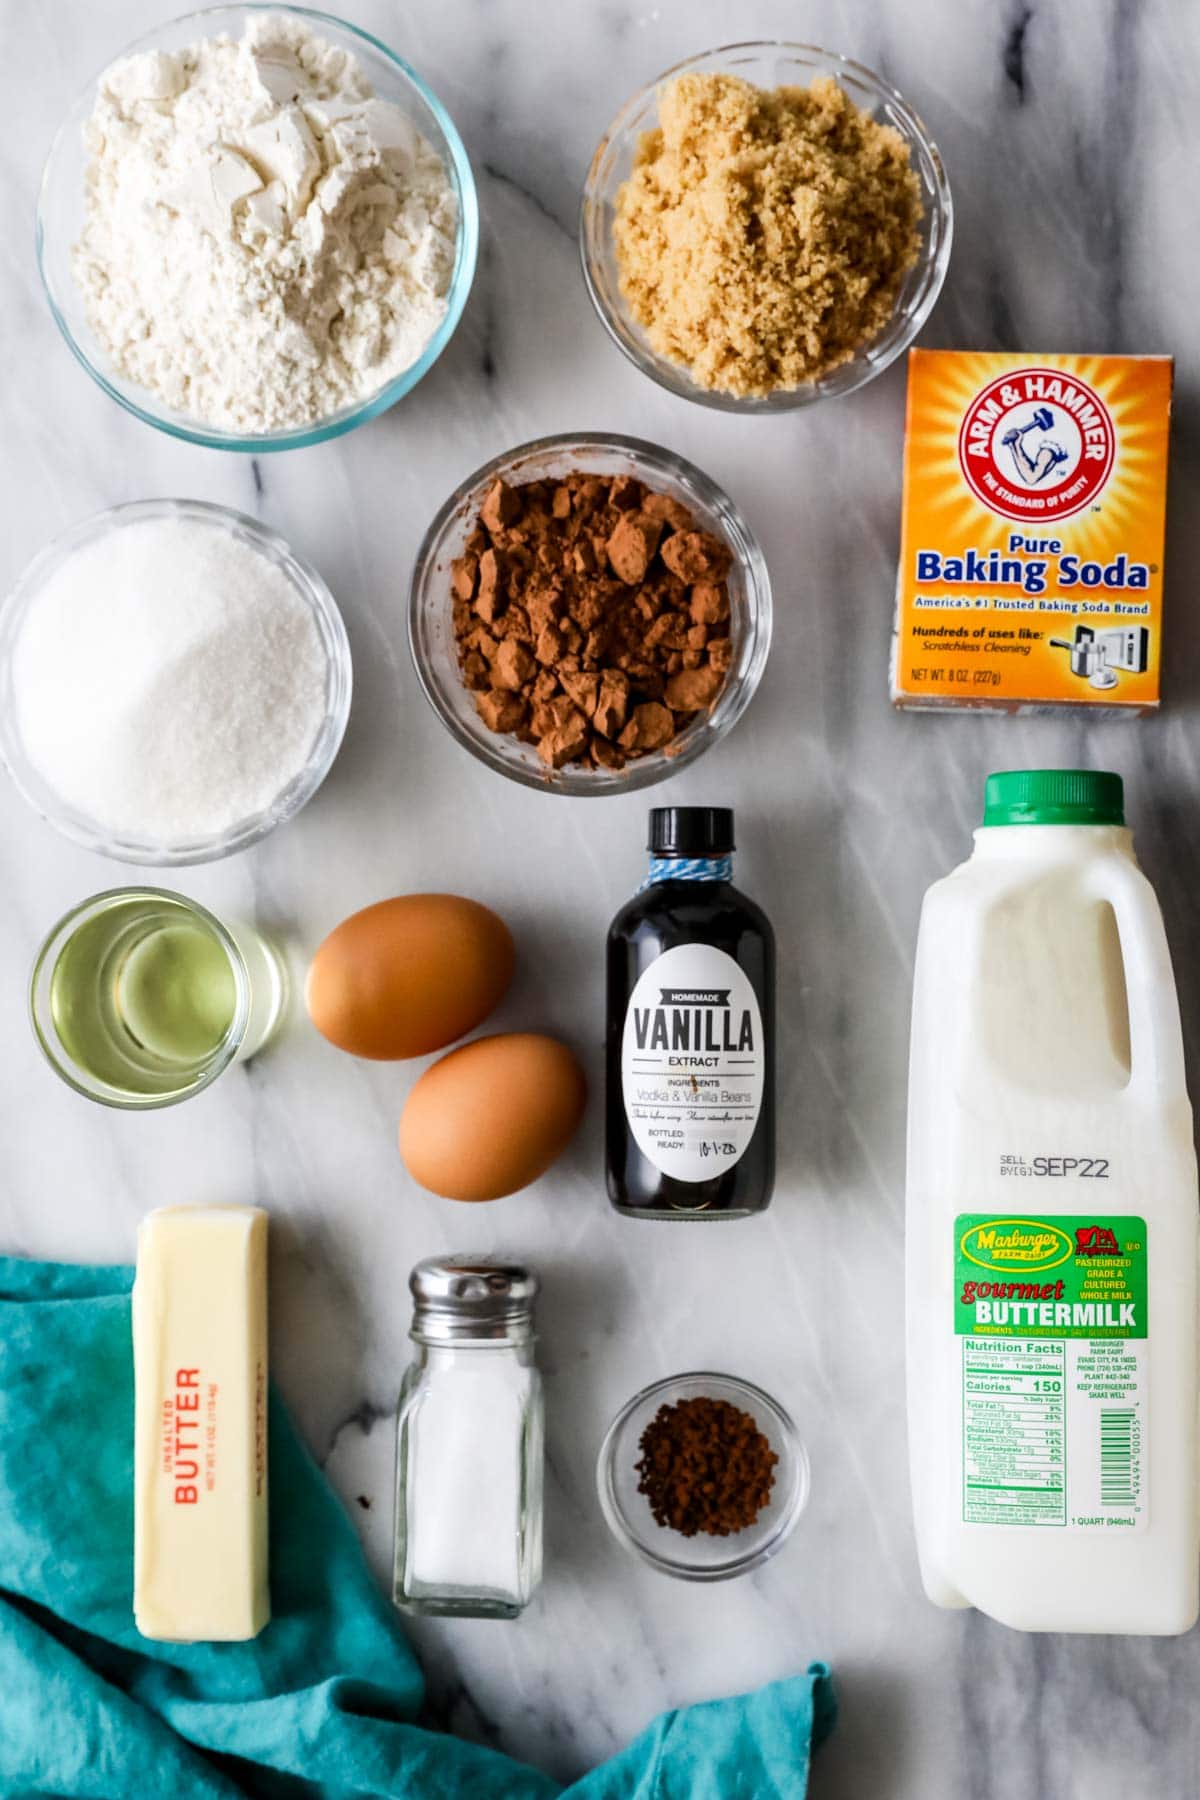 Overhead view of ingredients including buttermilk, cocoa powder, brown sugar, and more.